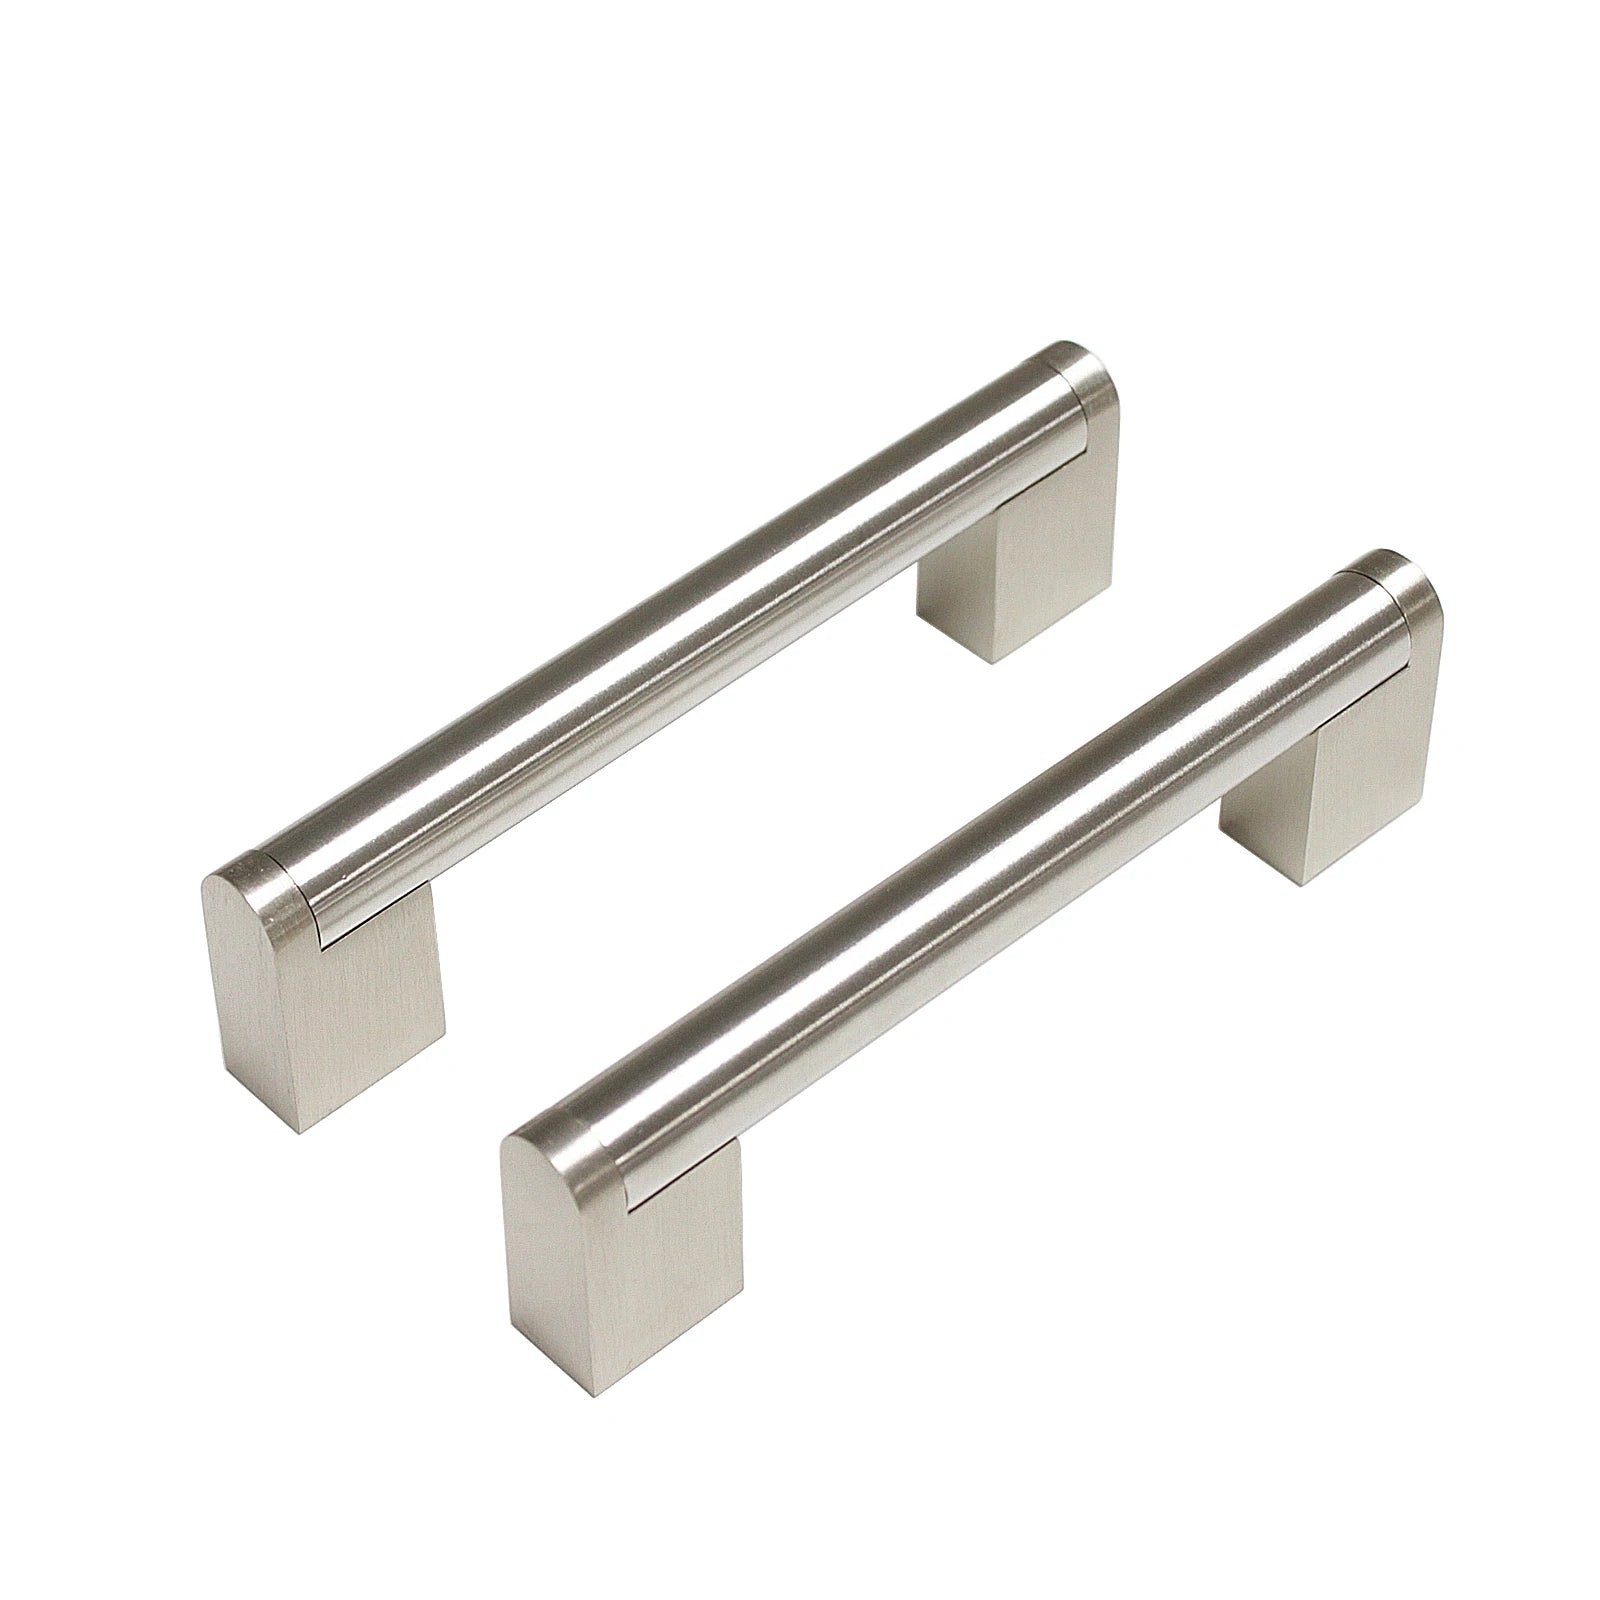 Probrico Stainless Steel Boss Bar Office Kitchen Cabinet Knob Cabinet Drawer Handle Pulls 320mm 25pack